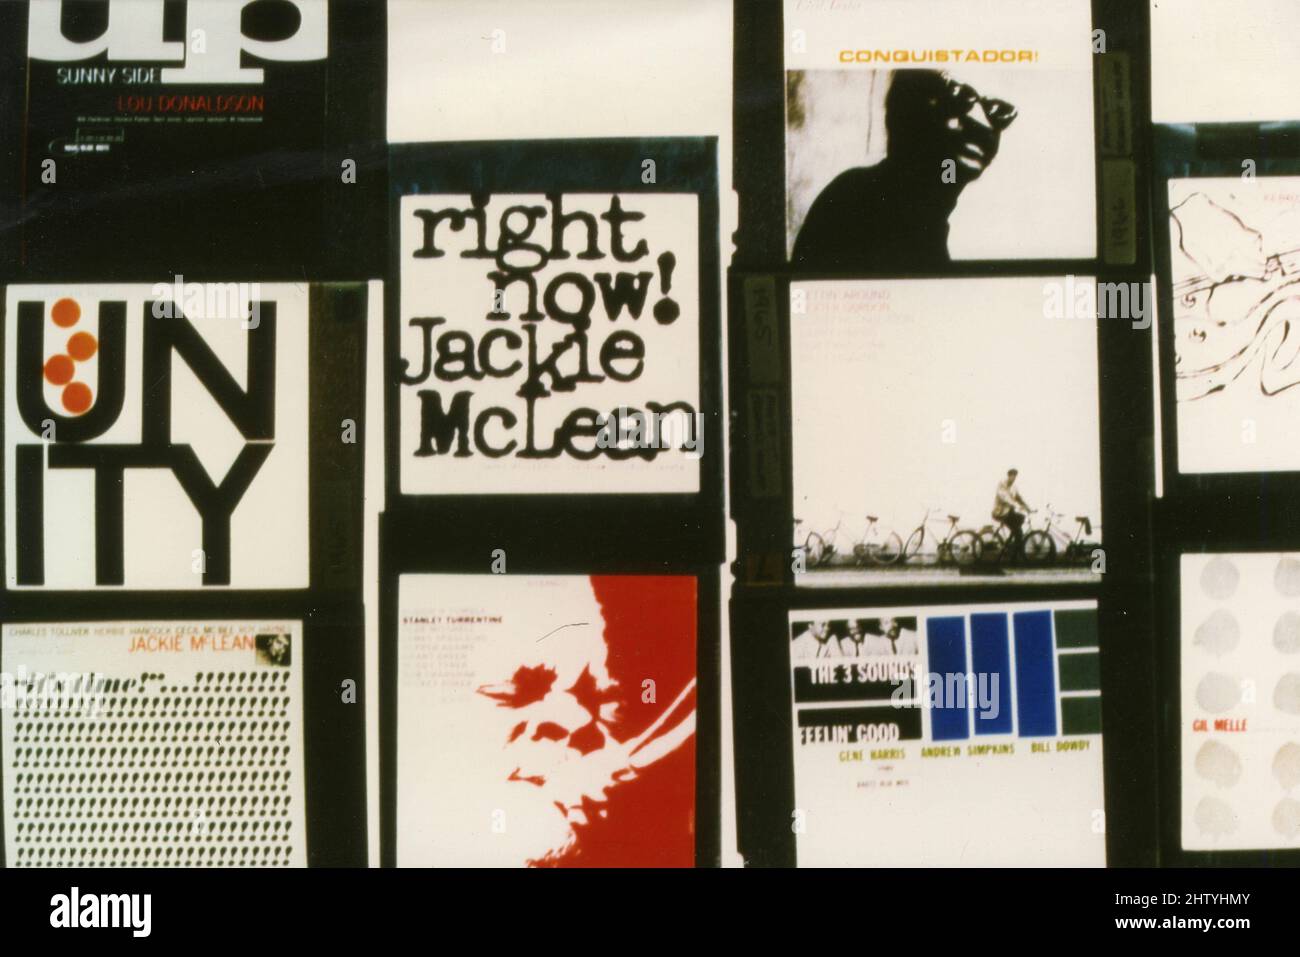 Promo di Jackie McLean nel film Blue Note, A Story of Modern Jazz, USA 1997 Foto Stock